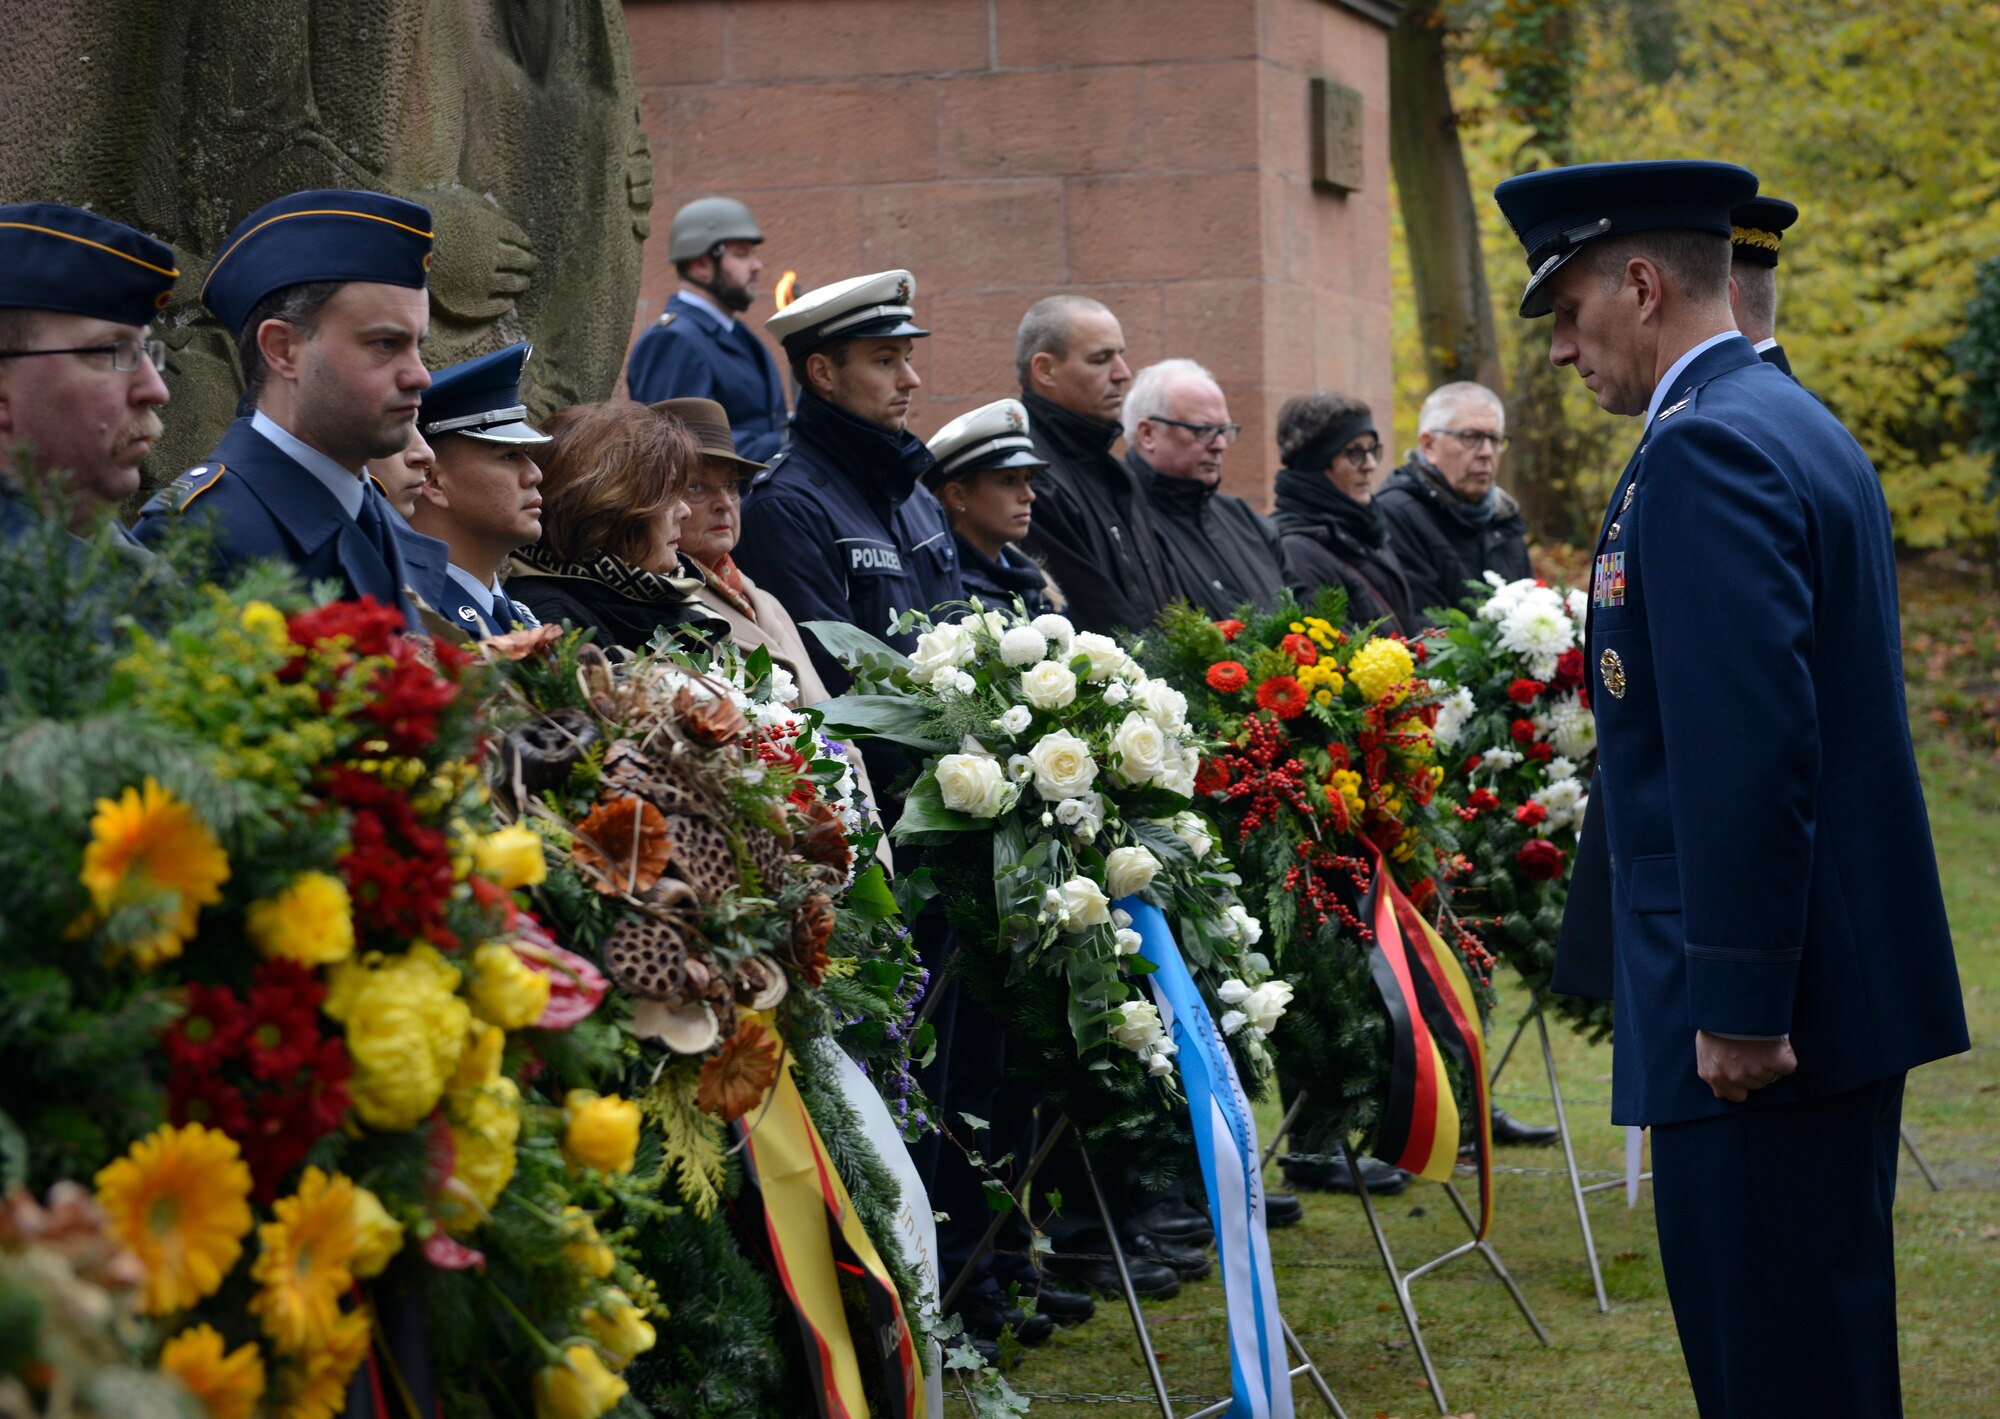 U.S. Air Force Col. Matthew Husemann, 86th Airlift Wing Vice Commander, stands in respect before ceremonial wreaths during the City of Kaiserslautern’s National Day of Mourning Ceremony, Kaiserslautern, Germany, Nov. 17, 2019. Kaiserslautern’s Lord Mayor Dr. Klaus Weichel and the German War Graves Commission invited Ramstein Air Base leadership to attend the ceremony. Known in Germany as Volkstrauertag, the National Day of Mounring is a time to remember the tragedy of war and mourn the victims, and to speak out for peace.